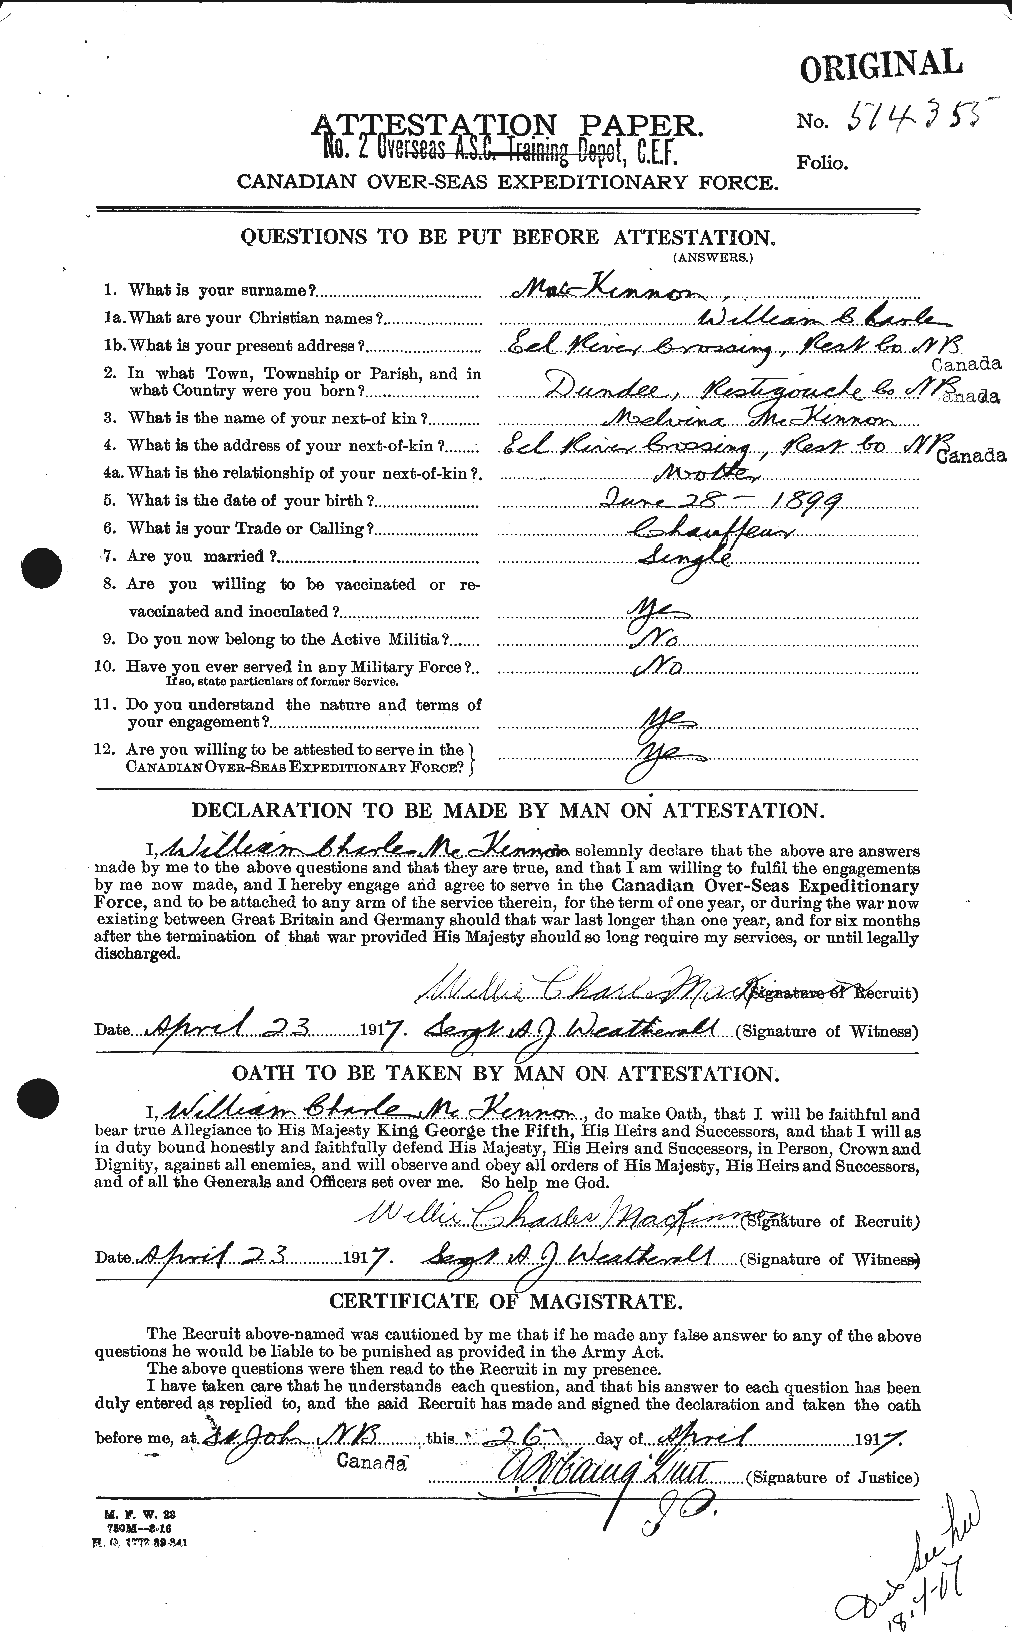 Personnel Records of the First World War - CEF 534318a